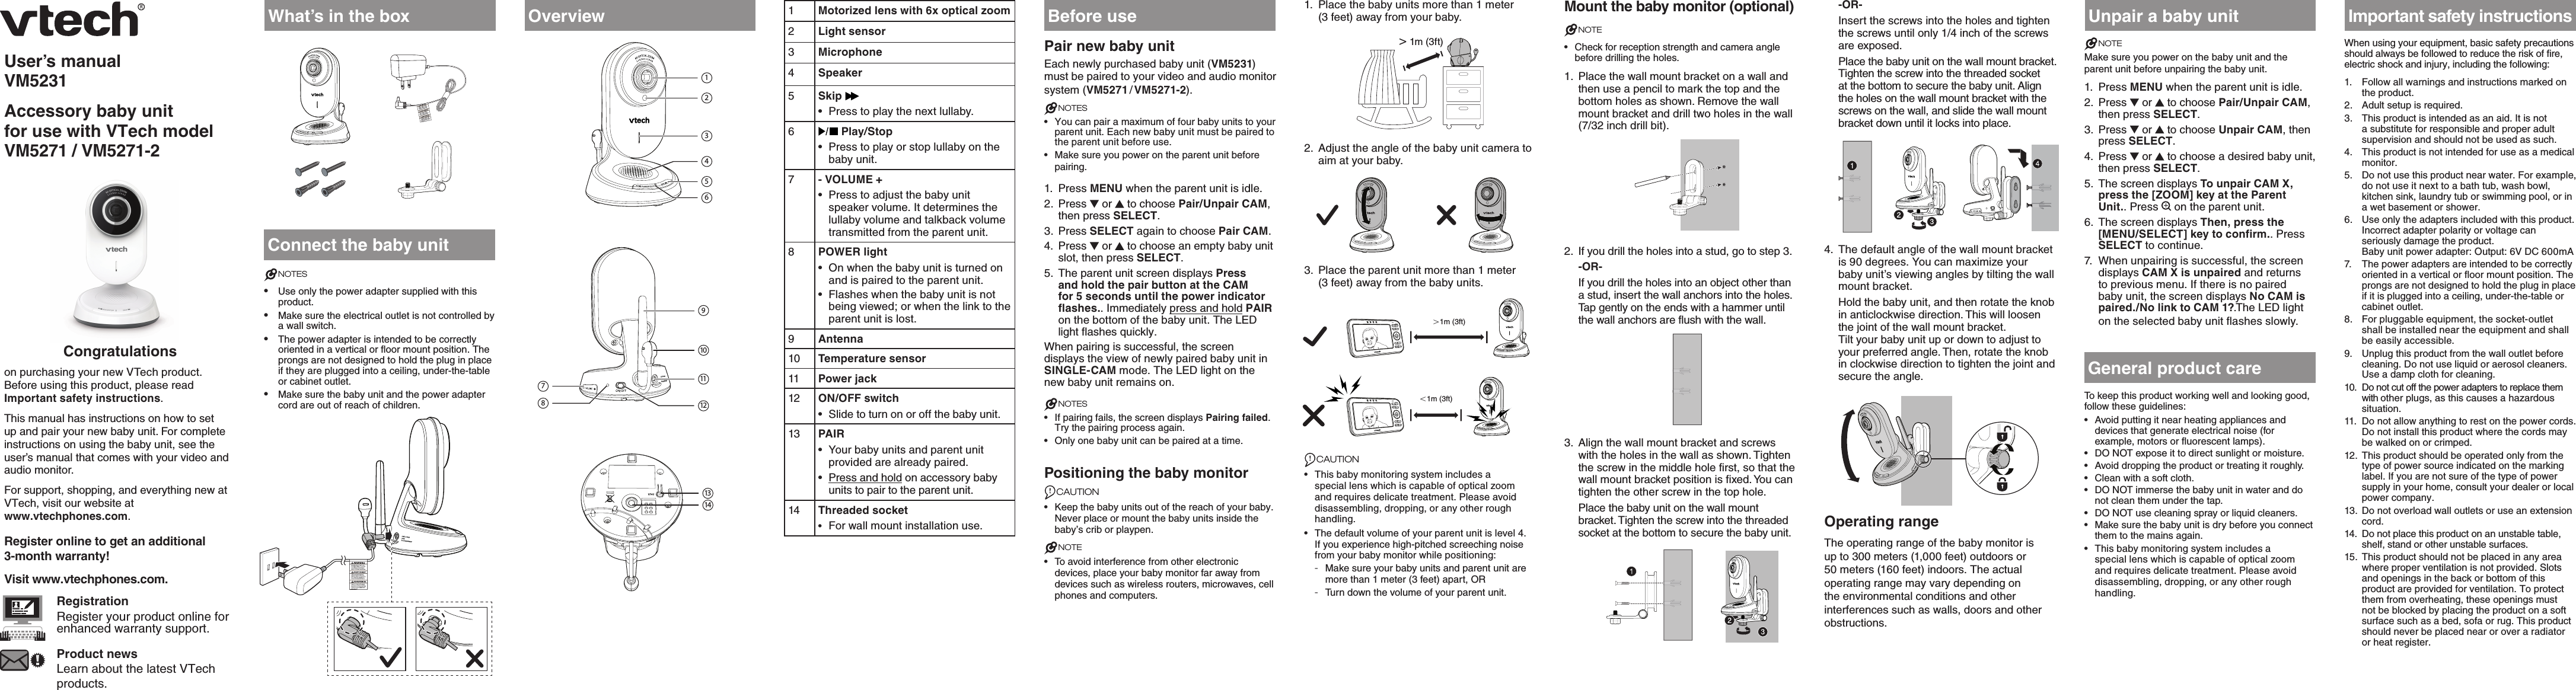 User’s manualVM5231Accessory baby unit for use with VTech model  VM5271 / VM5271-2  Congratulationson purchasing your new VTech product. Before using this product, please read Important safety instructions. This manual has instructions on how to set up and pair your new baby unit. For complete instructions on using the baby unit, see the user’s manual that comes with your video and audio monitor.For support, shopping, and everything new at VTech, visit our website at  www.vtechphones.com.Register online to get an additional  3-month warranty!Visit www.vtechphones.com.RegistrationRegister your product online for enhanced warranty support.Product newsLearn about the latest VTech products.What’s in the boxConnect the baby unitNOTES•  Use only the power adapter supplied with this product.•  Make sure the electrical outlet is not controlled by a wall switch.•  The power adapter is intended to be correctly oriented in a vertical or floor mount position. The prongs are not designed to hold the plug in place if they are plugged into a ceiling, under-the-table or cabinet outlet.•  Make sure the baby unit and the power adapter cord are out of reach of children.Overview 1Motorized lens with 6x optical zoom2Light sensor3Microphone4Speaker5Skip •  Press to play the next lullaby.6 Play/Stop•  Press to play or stop lullaby on the baby unit.7- VOLUME +•  Press to adjust the baby unit speaker volume. It determines the lullaby volume and talkback volume transmitted from the parent unit.8POWER light•  On when the baby unit is turned on and is paired to the parent unit.•  Flashes when the baby unit is not being viewed; or when the link to the parent unit is lost.9Antenna10 Temperature sensor11 Power jack12 ON/OFF switch•  Slide to turn on or off the baby unit.13 PAIR•  Your baby units and parent unit provided are already paired. •  Press and hold on accessory baby units to pair to the parent unit.14 Threaded socket•  For wall mount installation use.Before usePair new baby unitEach newly purchased baby unit (VM5231) must be paired to your video and audio monitor system (VM5271 / VM5271-2).NOTES•  You can pair a maximum of four baby units to your parent unit. Each new baby unit must be paired to the parent unit before use.•  Make sure you power on the parent unit before pairing.1.  Press MENU when the parent unit is idle.2.  Press   or   to choose Pair/Unpair CAM, then press SELECT.3.  Press SELECT again to choose Pair CAM.4.  Press   or   to choose an empty baby unit slot, then press SELECT. 5.  The parent unit screen displays Press and hold the pair button at the CAM for 5 seconds until the power indicator flashes.. Immediately press and hold PAIR on the bottom of the baby unit. The LED light flashes quickly.When pairing is successful, the screen displays the view of newly paired baby unit in  SINGLE-CAM mode. The LED light on the new baby unit remains on.NOTES•  If pairing fails, the screen displays Pairing failed. Try the pairing process again.•  Only one baby unit can be paired at a time.Positioning the baby monitorCAUTION•  Keep the baby units out of the reach of your baby. Never place or mount the baby units inside the baby’s crib or playpen.NOTE•  To avoid interference from other electronic devices, place your baby monitor far away from devices such as wireless routers, microwaves, cell phones and computers.1.  Place the baby units more than 1 meter  (3 feet) away from your baby.&gt; 1m (3ft)&gt; 1m (3ft)2.  Adjust the angle of the baby unit camera to aim at your baby. 3.  Place the parent unit more than 1 meter  (3 feet) away from the baby units.CAUTION•  This baby monitoring system includes a special lens which is capable of optical zoom and requires delicate treatment. Please avoid disassembling, dropping, or any other rough handling.•  The default volume of your parent unit is level 4. If you experience high-pitched screeching noise from your baby monitor while positioning: -Make sure your baby units and parent unit are more than 1 meter (3 feet) apart, OR -Turn down the volume of your parent unit.Mount the baby monitor (optional)NOTE•  Check for reception strength and camera angle before drilling the holes.1.  Place the wall mount bracket on a wall and then use a pencil to mark the top and the bottom holes as shown. Remove the wall mount bracket and drill two holes in the wall (7/32 inch drill bit).2.  If you drill the holes into a stud, go to step 3.-OR-If you drill the holes into an object other than a stud, insert the wall anchors into the holes. Tap gently on the ends with a hammer until the wall anchors are flush with the wall.3.  Align the wall mount bracket and screws with the holes in the wall as shown. Tighten the screw in the middle hole first, so that the wall mount bracket position is fixed. You can tighten the other screw in the top hole.Place the baby unit on the wall mount bracket. Tighten the screw into the threaded socket at the bottom to secure the baby unit.-OR-Insert the screws into the holes and tighten the screws until only 1/4 inch of the screws are exposed.Place the baby unit on the wall mount bracket. Tighten the screw into the threaded socket at the bottom to secure the baby unit. Align the holes on the wall mount bracket with the screws on the wall, and slide the wall mount bracket down until it locks into place.4.  The default angle of the wall mount bracket is 90 degrees. You can maximize your baby unit’s viewing angles by tilting the wall mount bracket. Hold the baby unit, and then rotate the knob in anticlockwise direction. This will loosen the joint of the wall mount bracket. Tilt your baby unit up or down to adjust to your preferred angle. Then, rotate the knob in clockwise direction to tighten the joint and secure the angle.Operating rangeThe operating range of the baby monitor is up to 300 meters (1,000 feet) outdoors or 50 meters (160 feet) indoors. The actual operating range may vary depending on the environmental conditions and other interferences such as walls, doors and other obstructions.Unpair a baby unitNOTEMake sure you power on the baby unit and the parent unit before unpairing the baby unit.1.  Press MENU when the parent unit is idle.2.  Press   or   to choose Pair/Unpair CAM, then press SELECT.3.  Press   or   to choose Unpair CAM, then press SELECT.4.  Press   or   to choose a desired baby unit, then press SELECT.5.  The screen displays To unpair CAM X, press the [ZOOM] key at the Parent Unit.. Press   on the parent unit.6.  The screen displays Then, press the [MENU/SELECT] key to confirm.. Press SELECT to continue.7.  When unpairing is successful, the screen displays CAM X is unpaired and returns to previous menu. If there is no paired baby unit, the screen displays No CAM is paired./No link to CAM 1?.The LED light on the selected baby unit flashes slowly. General product careTo keep this product working well and looking good, follow these guidelines:•  Avoid putting it near heating appliances and devices that generate electrical noise (for example, motors or fluorescent lamps).•  DO NOT expose it to direct sunlight or moisture.•  Avoid dropping the product or treating it roughly.•  Clean with a soft cloth.•  DO NOT immerse the baby unit in water and do not clean them under the tap.•  DO NOT use cleaning spray or liquid cleaners.•  Make sure the baby unit is dry before you connect them to the mains again.•  This baby monitoring system includes a special lens which is capable of optical zoom and requires delicate treatment. Please avoid disassembling, dropping, or any other rough handling.Important safety instructionsWhen using your equipment, basic safety precautions should always be followed to reduce the risk of fire, electric shock and injury, including the following:1.  Follow all warnings and instructions marked on the product.2.  Adult setup is required.3.  This product is intended as an aid. It is not a substitute for responsible and proper adult supervision and should not be used as such.4.  This product is not intended for use as a medical monitor.5.  Do not use this product near water. For example, do not use it next to a bath tub, wash bowl, kitchen sink, laundry tub or swimming pool, or in a wet basement or shower.6.  Use only the adapters included with this product. Incorrect adapter polarity or voltage can seriously damage the product.  Baby unit power adapter: Output: 6V DC 600mA 7.  The power adapters are intended to be correctly oriented in a vertical or floor mount position. The prongs are not designed to hold the plug in place if it is plugged into a ceiling, under-the-table or cabinet outlet.8.  For pluggable equipment, the socket-outlet shall be installed near the equipment and shall be easily accessible.9.  Unplug this product from the wall outlet before cleaning. Do not use liquid or aerosol cleaners. Use a damp cloth for cleaning.10.  Do not cut off the power adapters to replace them with other plugs, as this causes a hazardous situation.11.  Do not allow anything to rest on the power cords. Do not install this product where the cords may be walked on or crimped.12.  This product should be operated only from the type of power source indicated on the marking label. If you are not sure of the type of power supply in your home, consult your dealer or local power company.13.  Do not overload wall outlets or use an extension cord.14.  Do not place this product on an unstable table, shelf, stand or other unstable surfaces.15.  This product should not be placed in any area where proper ventilation is not provided. Slots and openings in the back or bottom of this product are provided for ventilation. To protect them from overheating, these openings must not be blocked by placing the product on a soft surface such as a bed, sofa or rug. This product should never be placed near or over a radiator or heat register.7824513691110121314＜1m (3ft)＞1m (3ft)